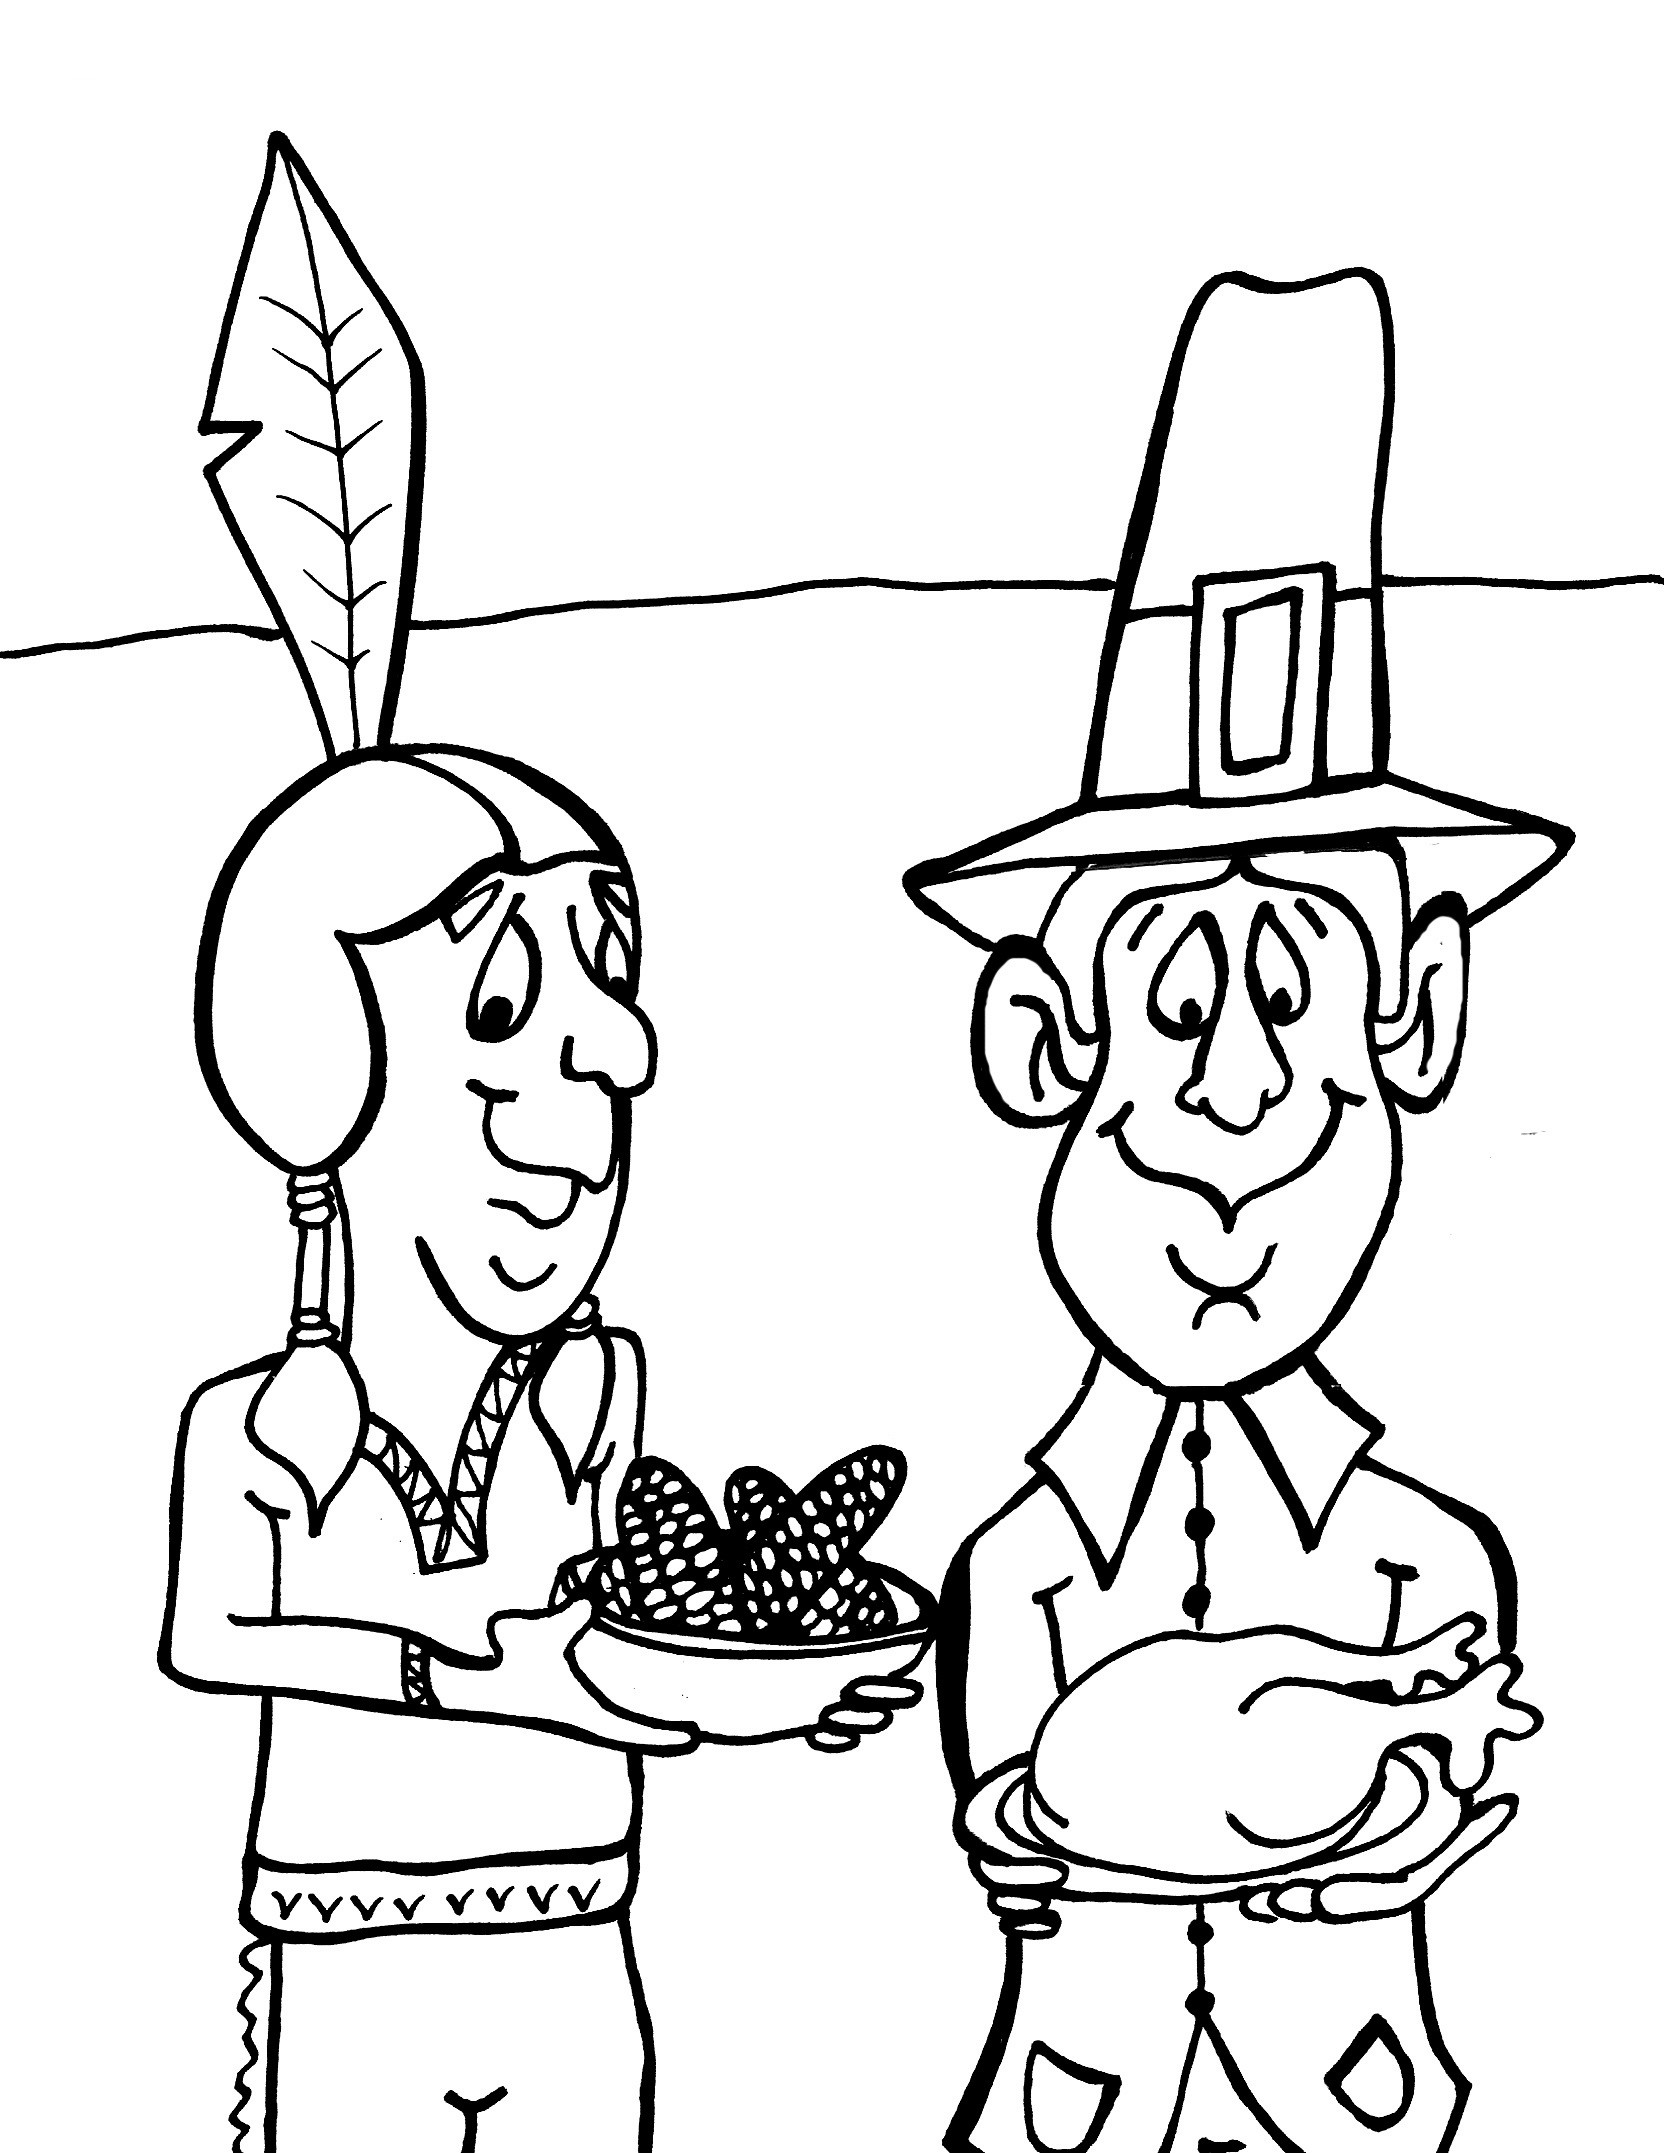 Free Printable Thanksgiving Coloring Pages
 Free Printable Thanksgiving Coloring Pages For Kids